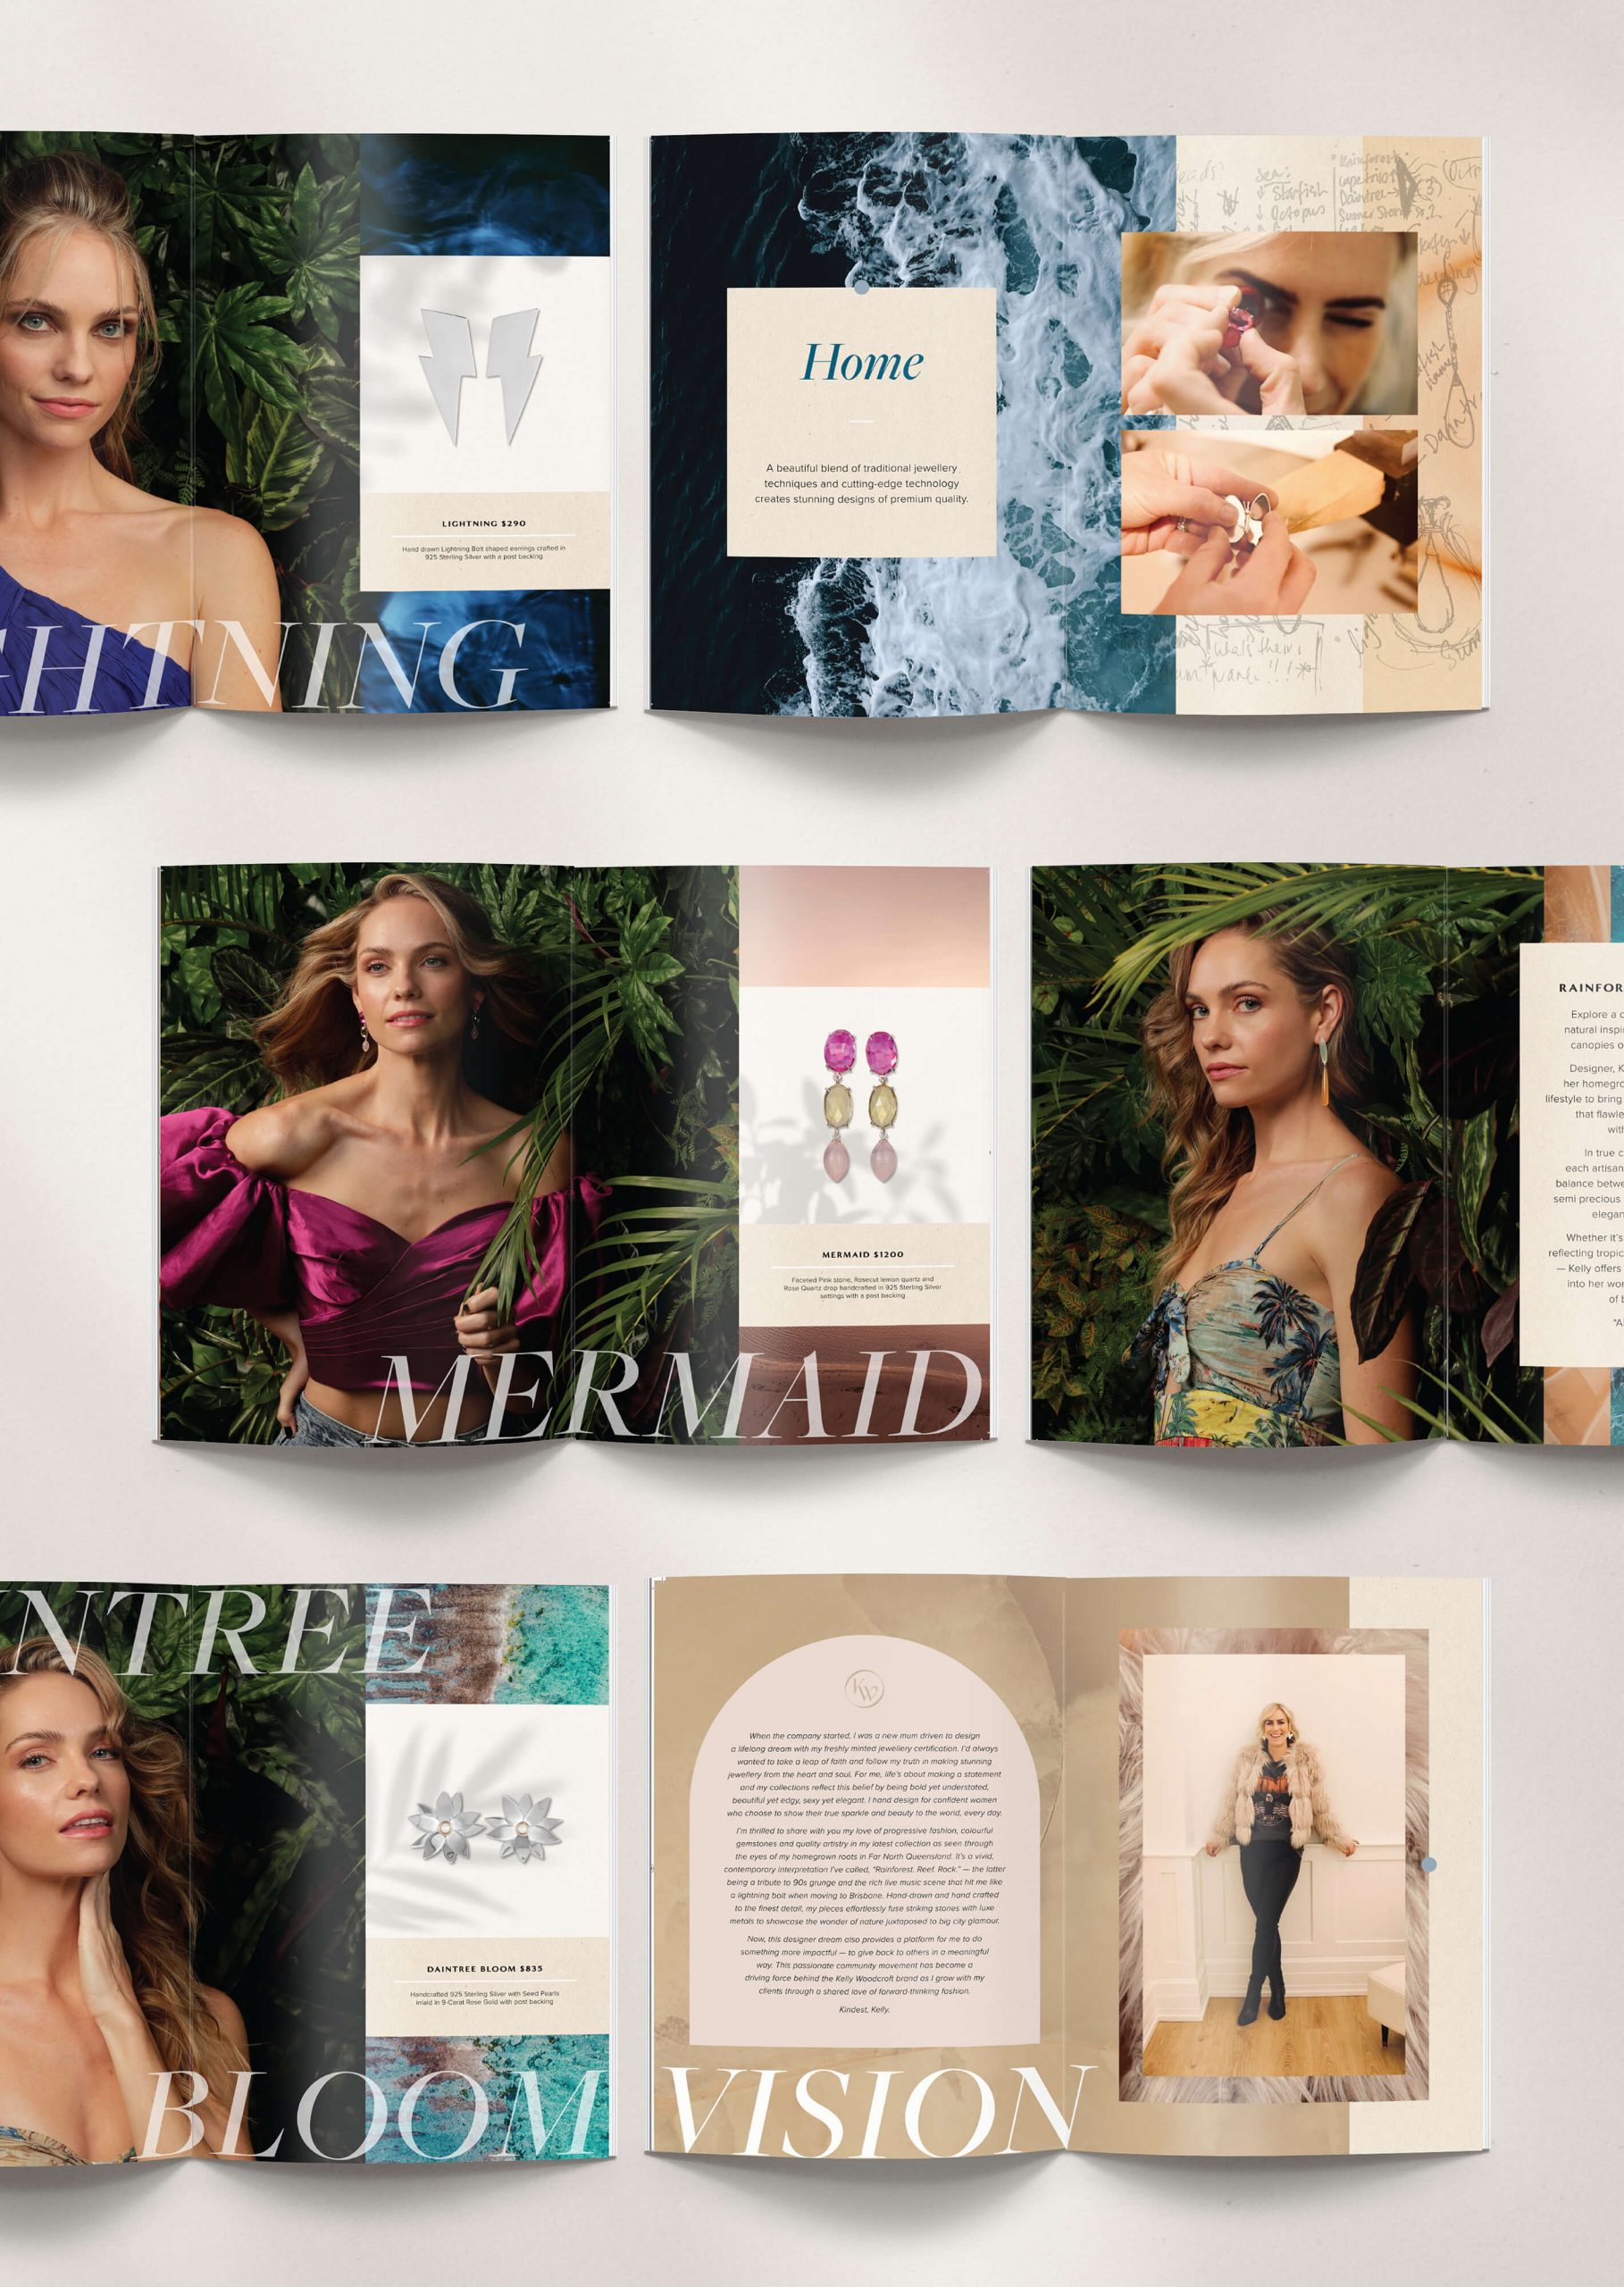 Custom lookbook design created for jewellery designer kelly woodcroft features bold design aesthetic and beautiful campaign imagery